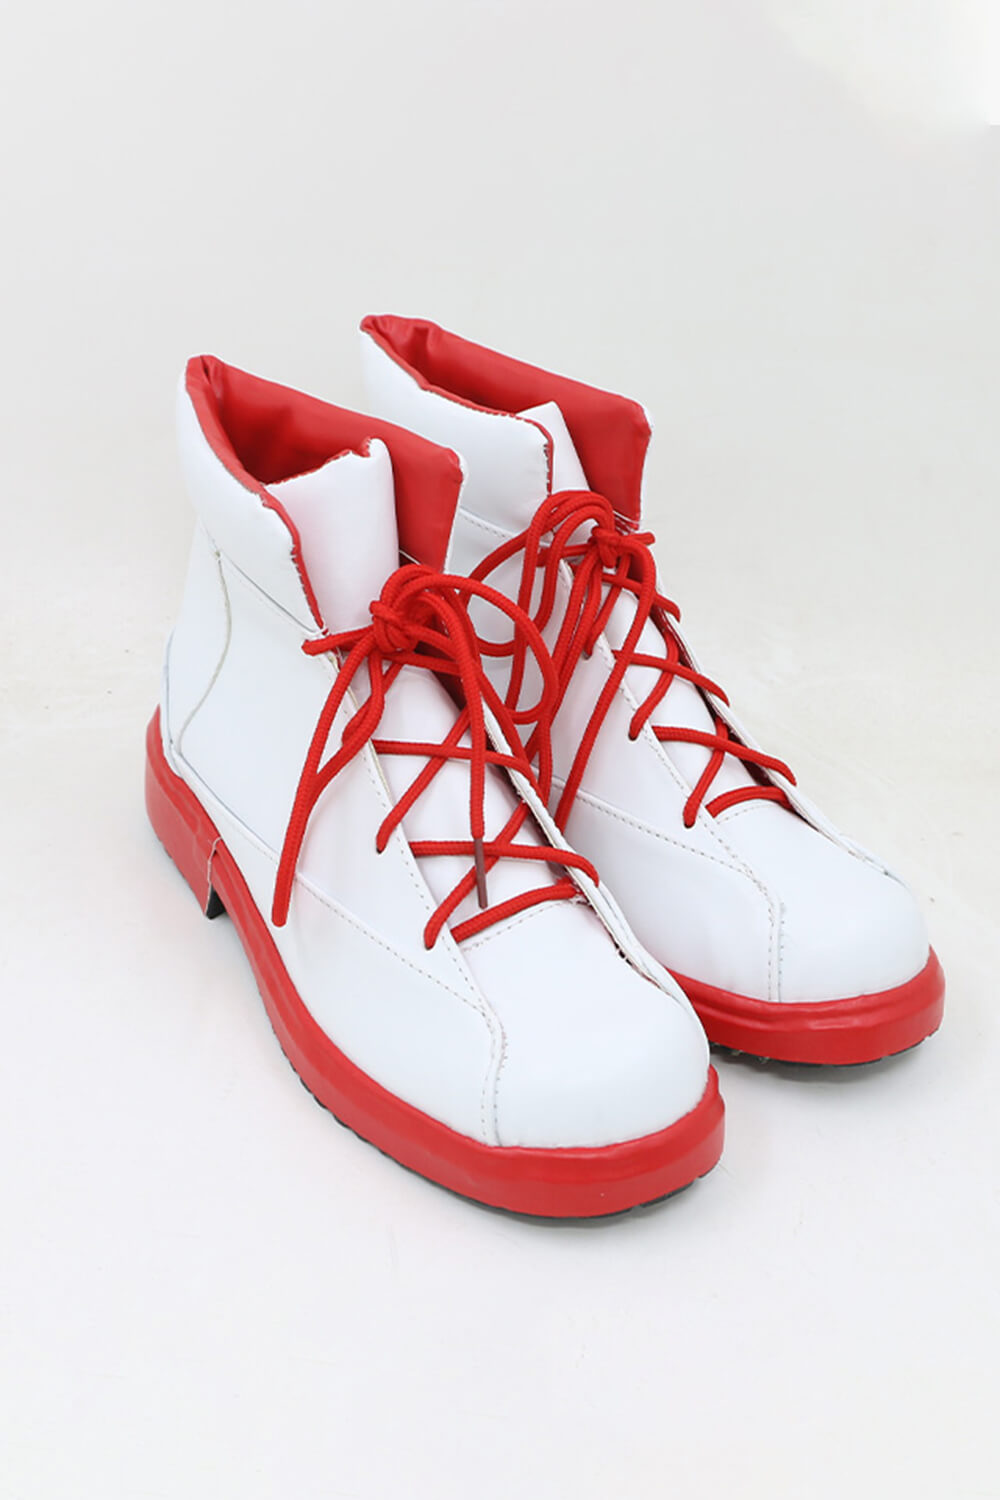 Chainsaw Man Power Cosplay Boots Shoes